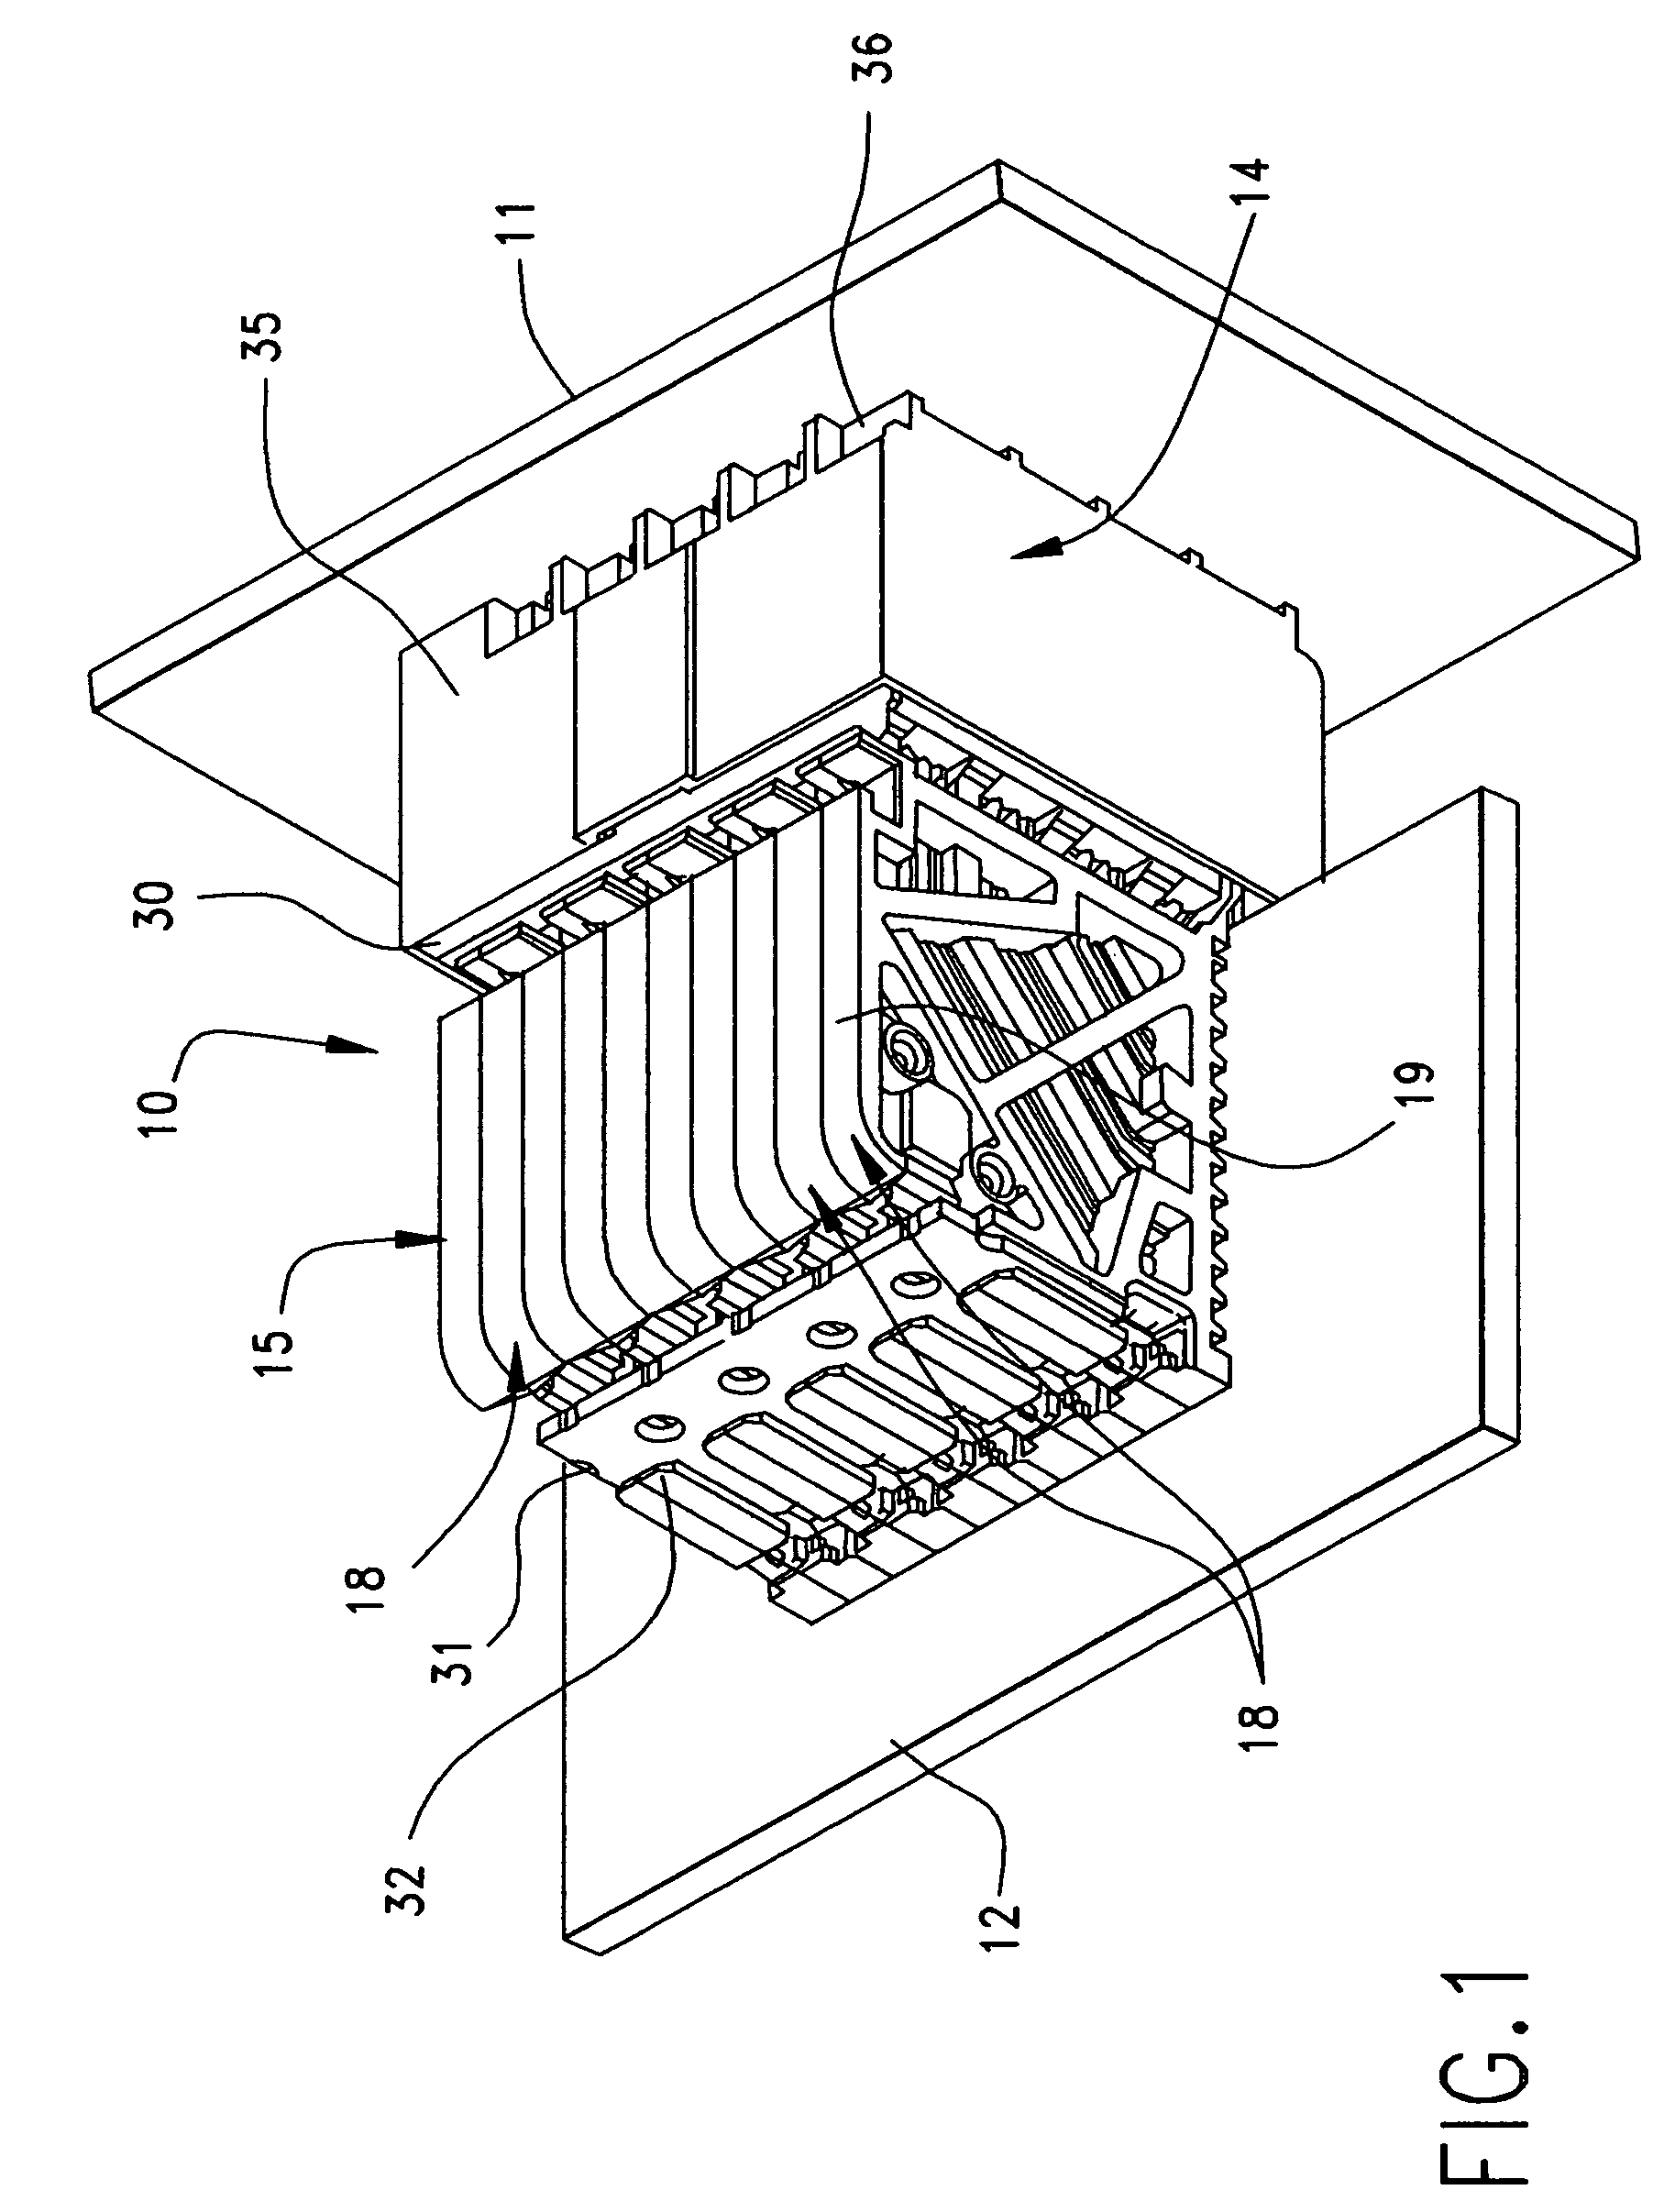 Backplane connector with improved pin header